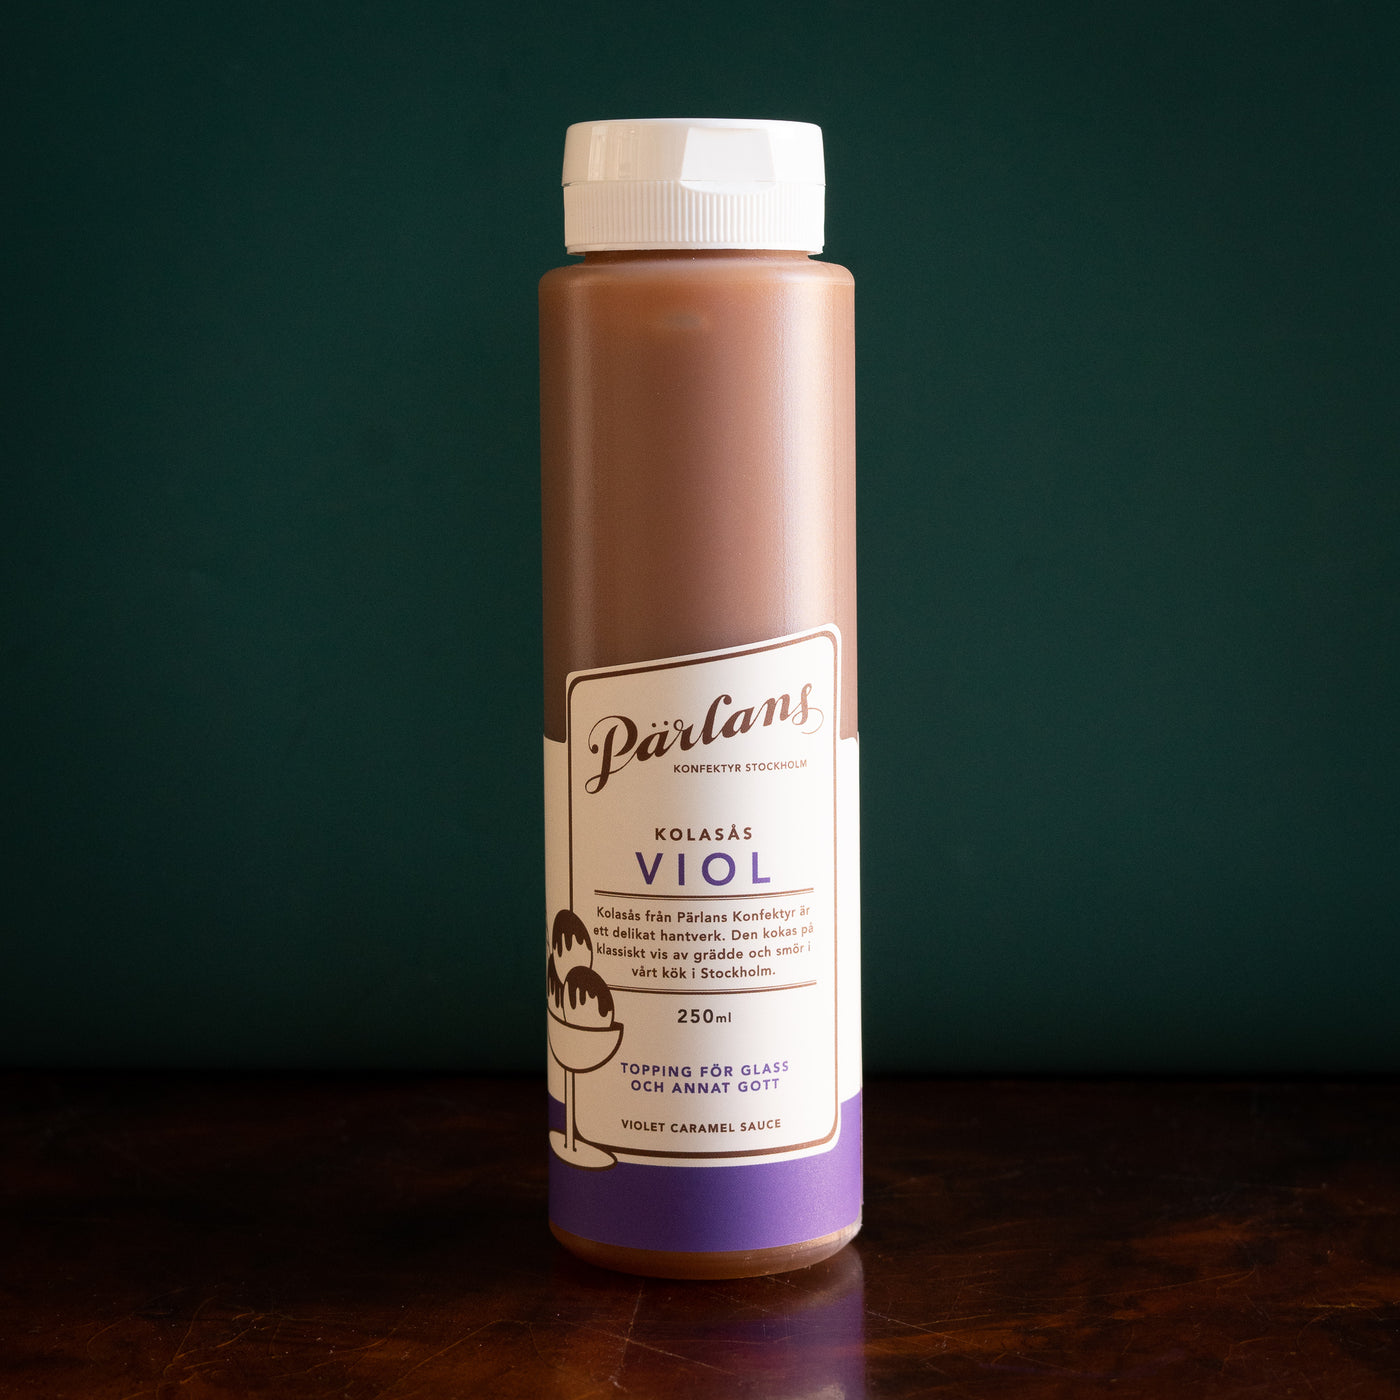 Our delicious caramel sauce in a handy squeeze bottle. Drizzle this glory over ice-cream or your other favourite desserts.<br><br>VIOLET – A delicate bouquet of flower and nectar, with a hint of liquorice, this caramel sauce is unassumingly sweet and lovely, like rain on spring day. 